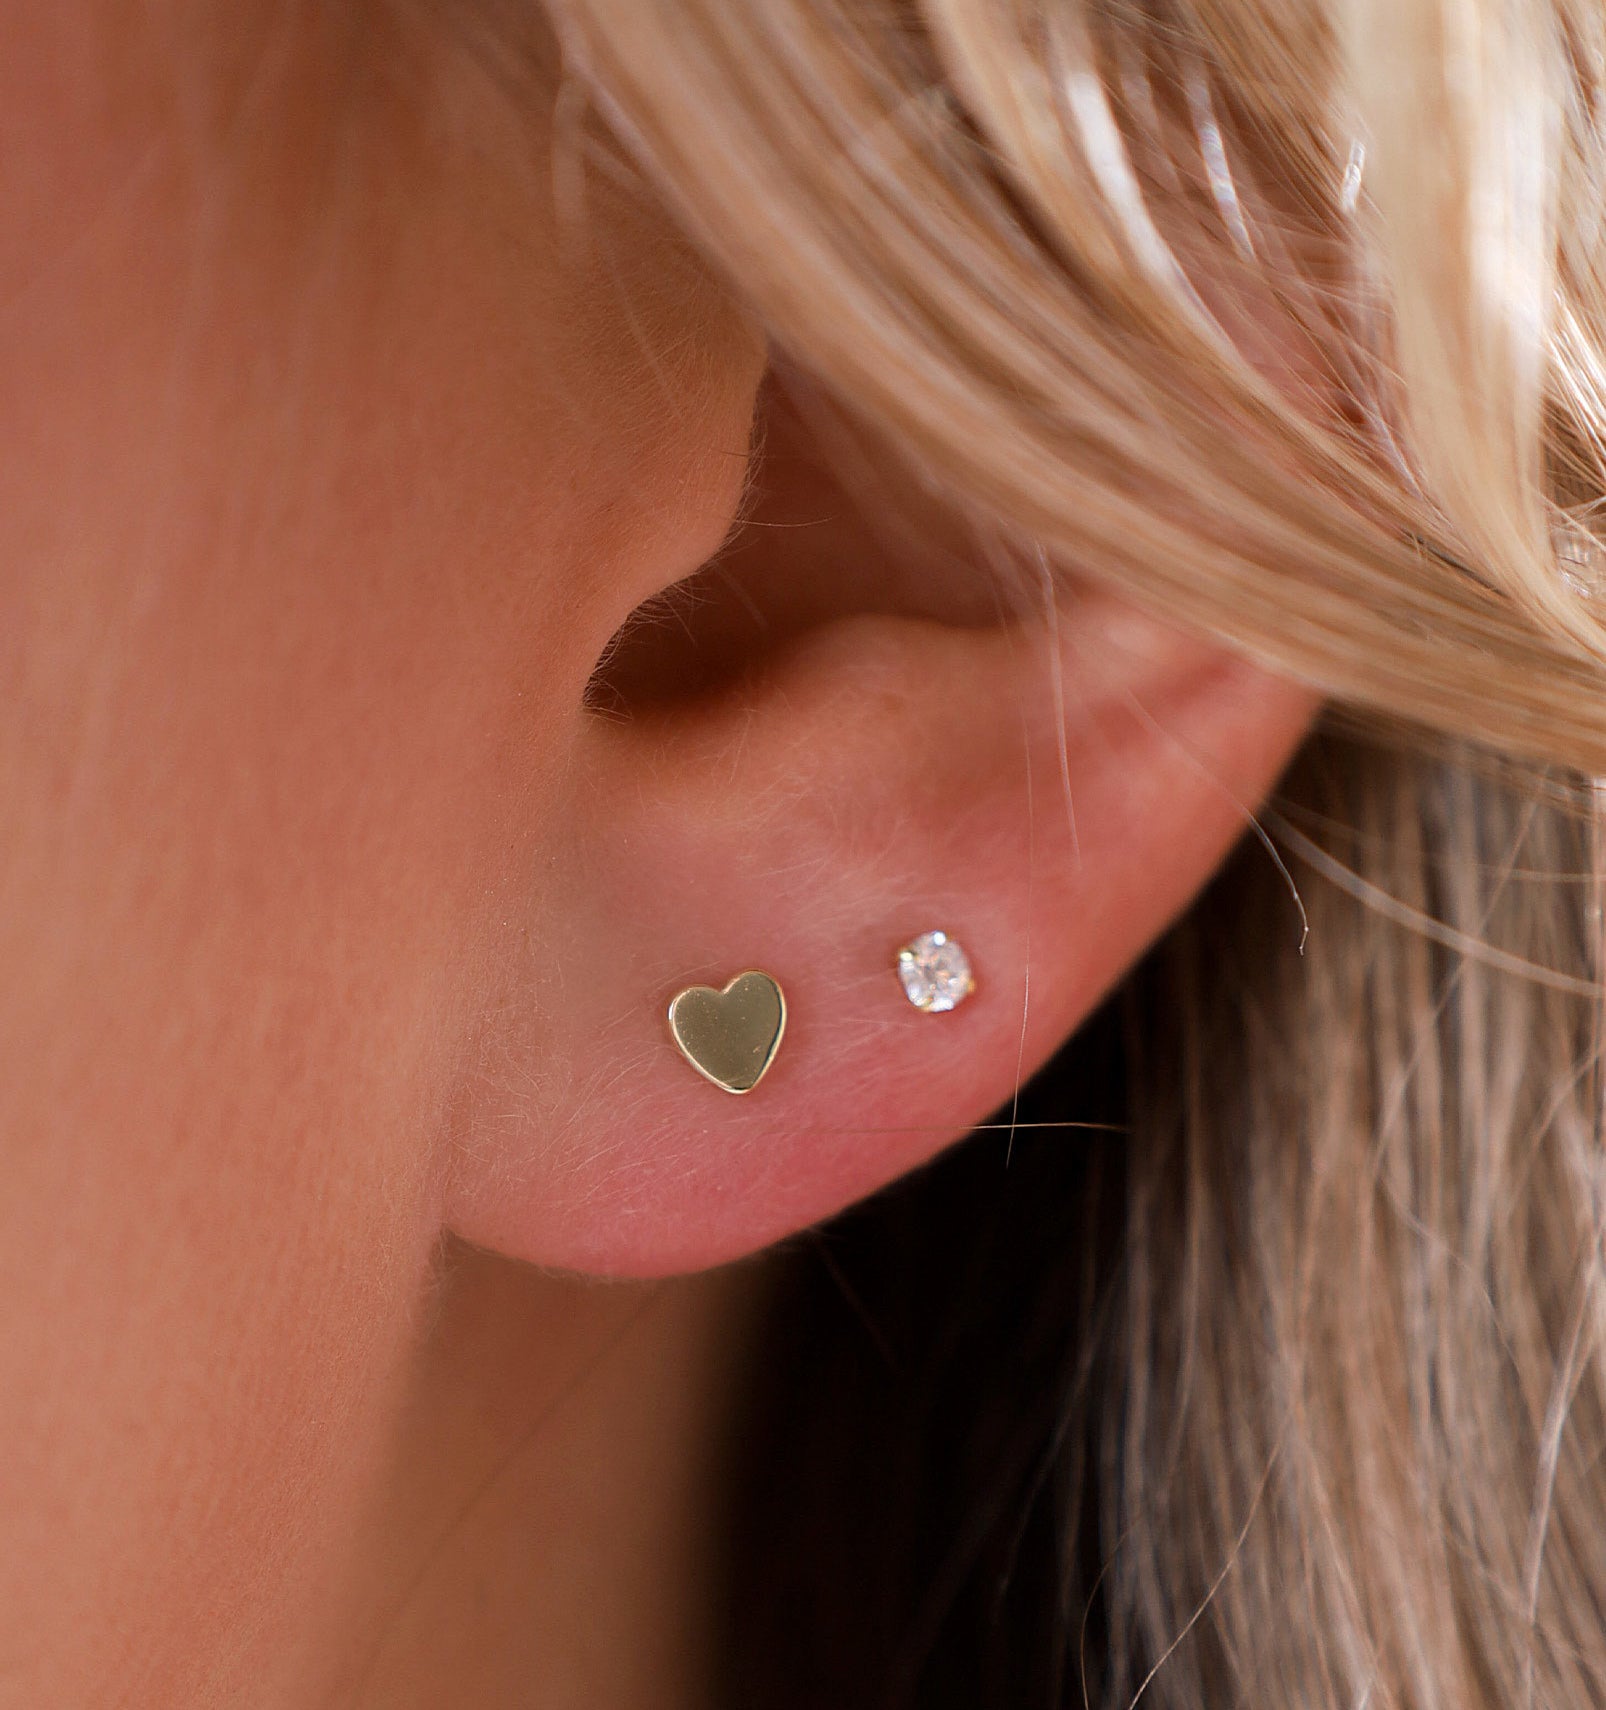 A close-up of a heart-shaped stud earring in someone&#x27;s ear lobe